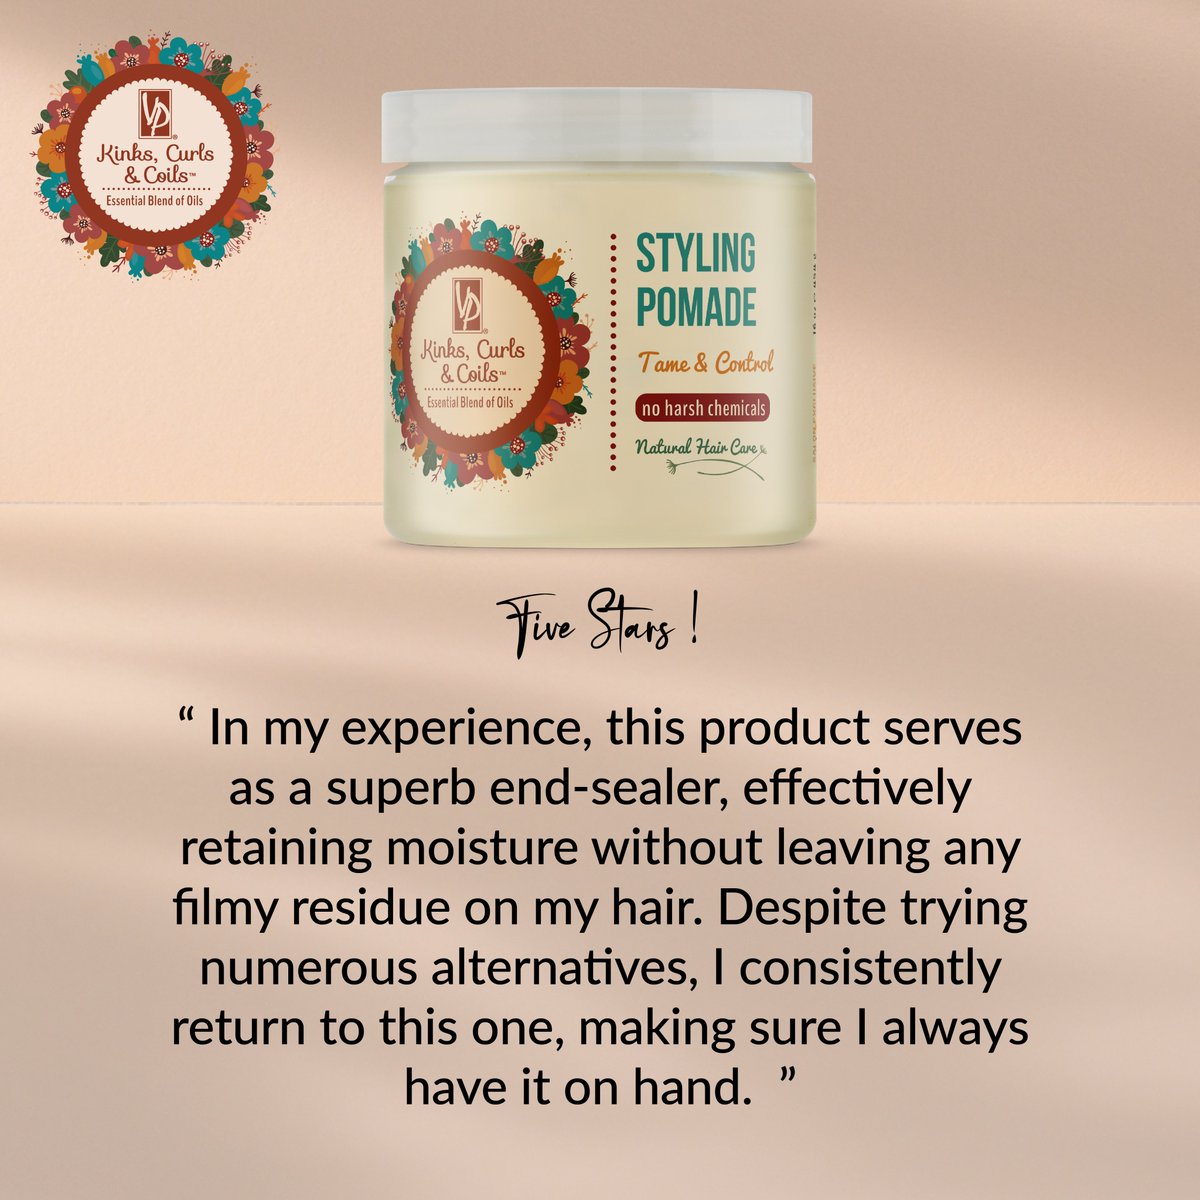 ⭐️ 5 stars for our Kinks, Curls & Coils Styling Pomade! ⭐️

This pomade is created with essential oils that keep your kinks, curls and coils looking their best. Tame and control your style with an all day hold.

#protectivestyles #naturalhaircare #naturalhaircareproducts